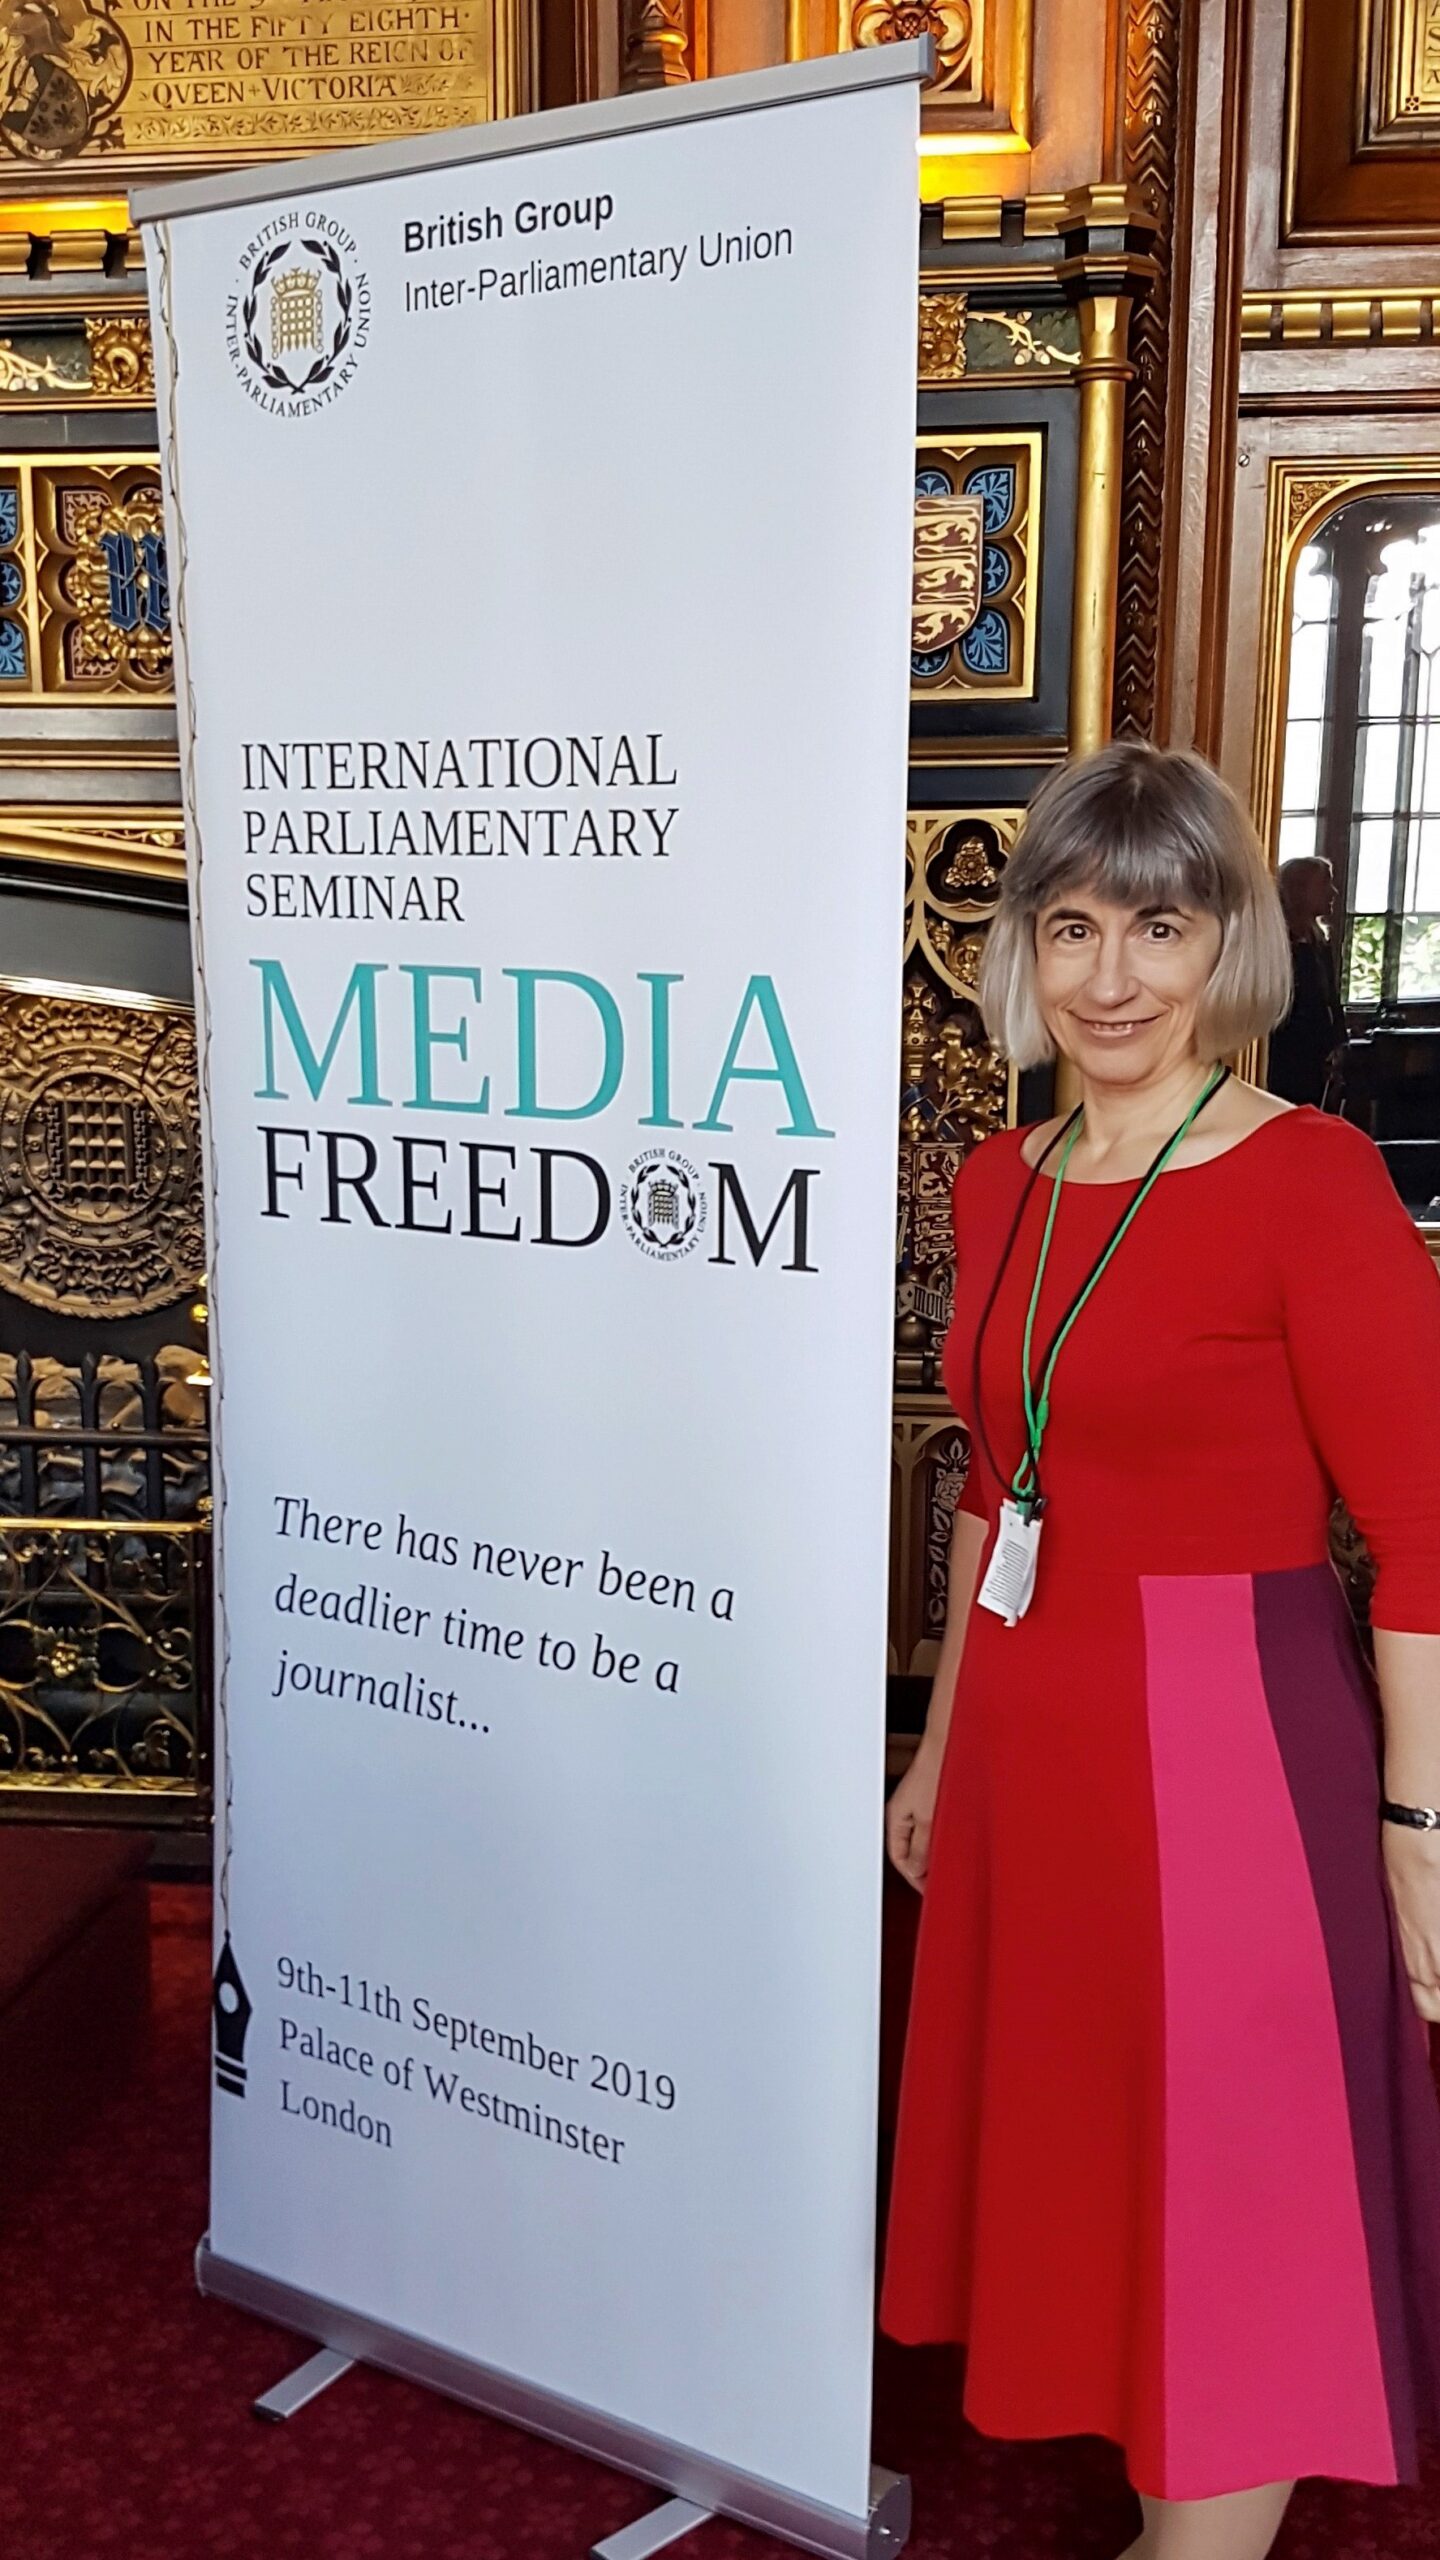 At the Media Freedom Conference in 2019.